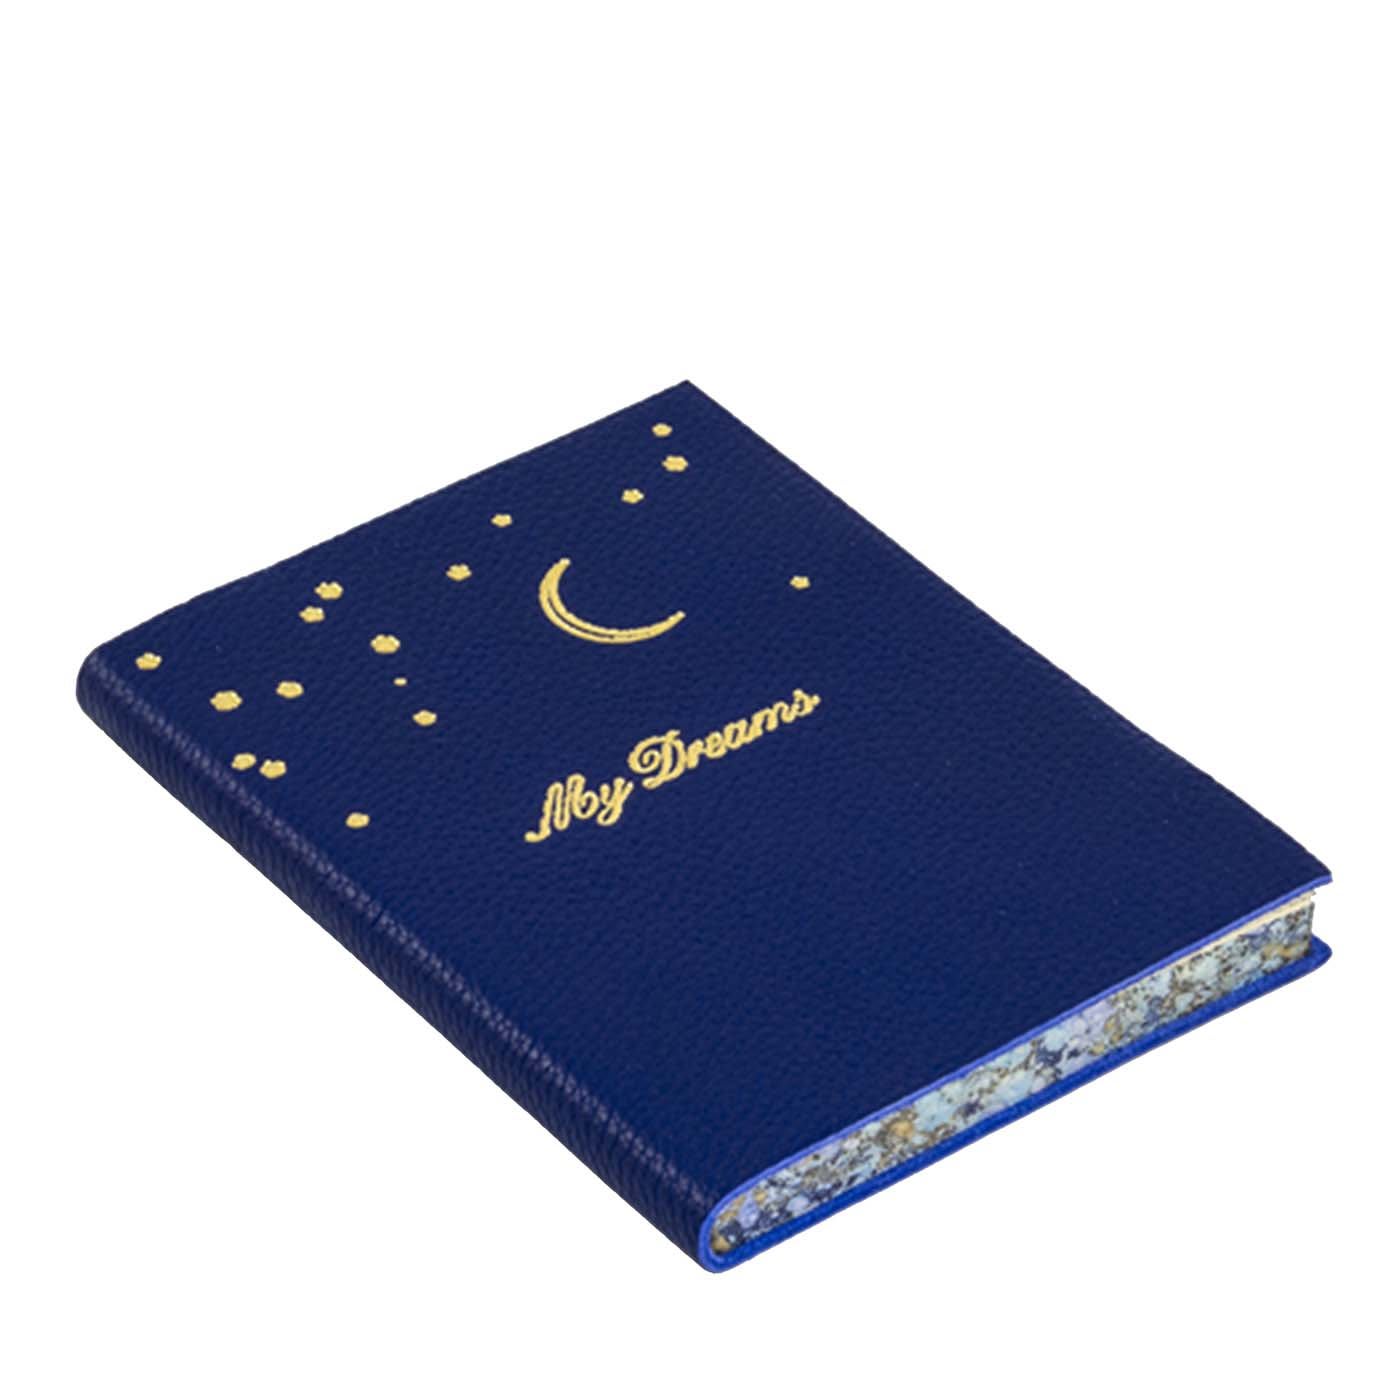 My Dreams Set of 2 Blue Journals - Giannini